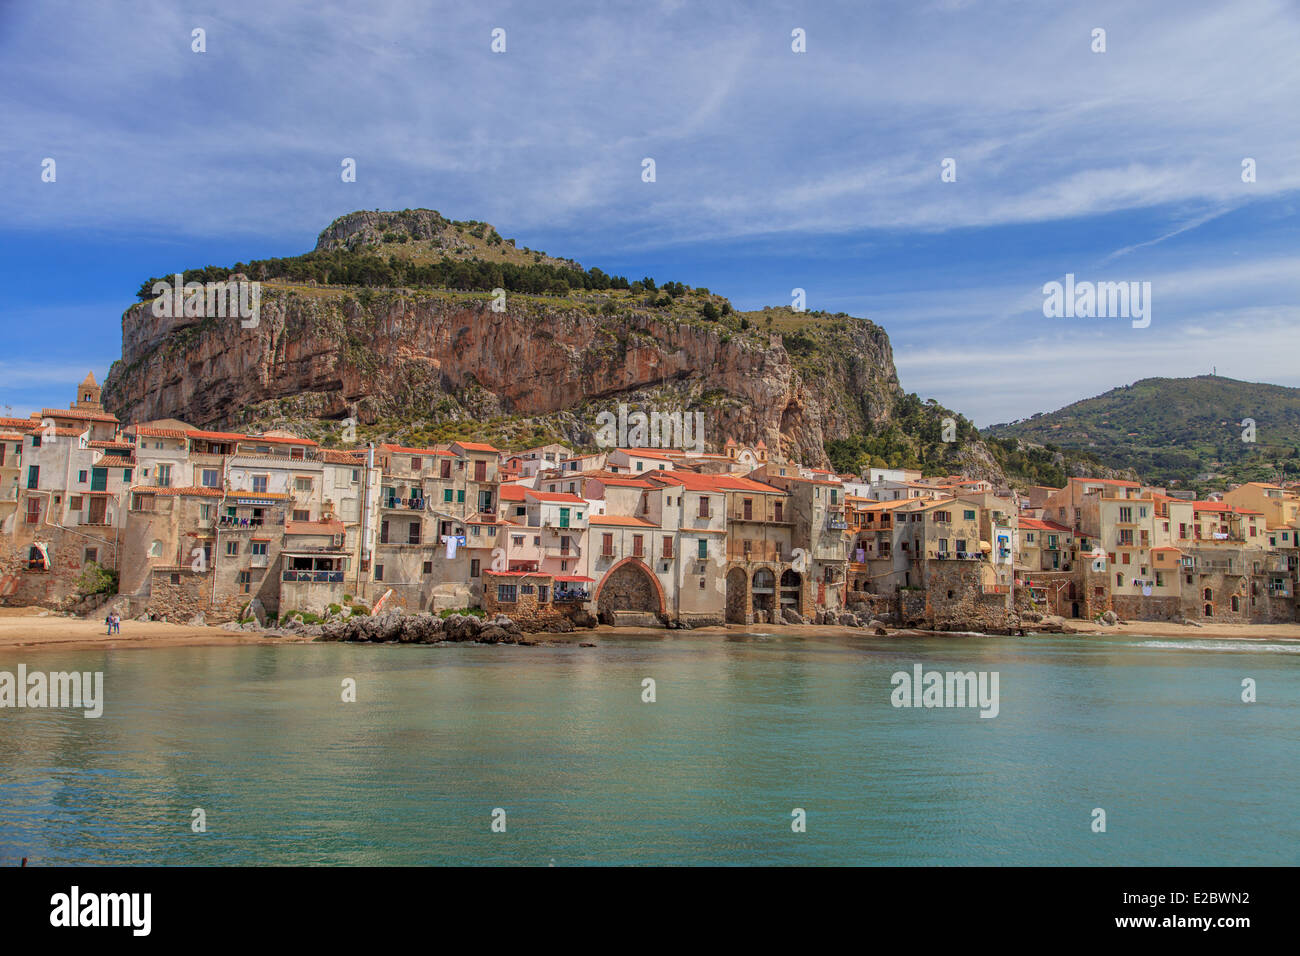 View of the old town of Cefalù Stock Photo